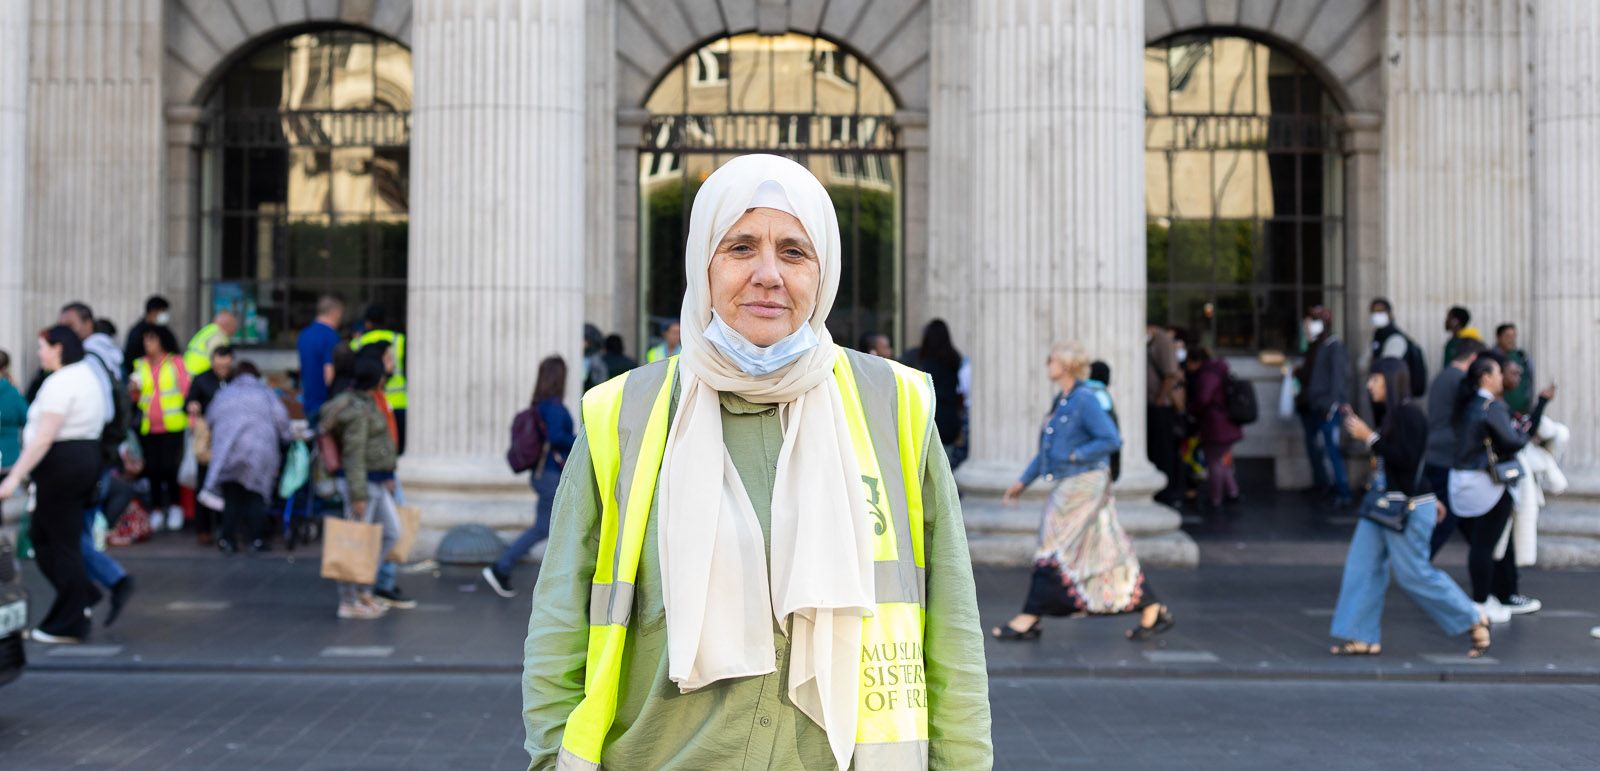 Lorraine O’Connor Muslim sisters of Eire co-founder outside Dublin General Post Office 